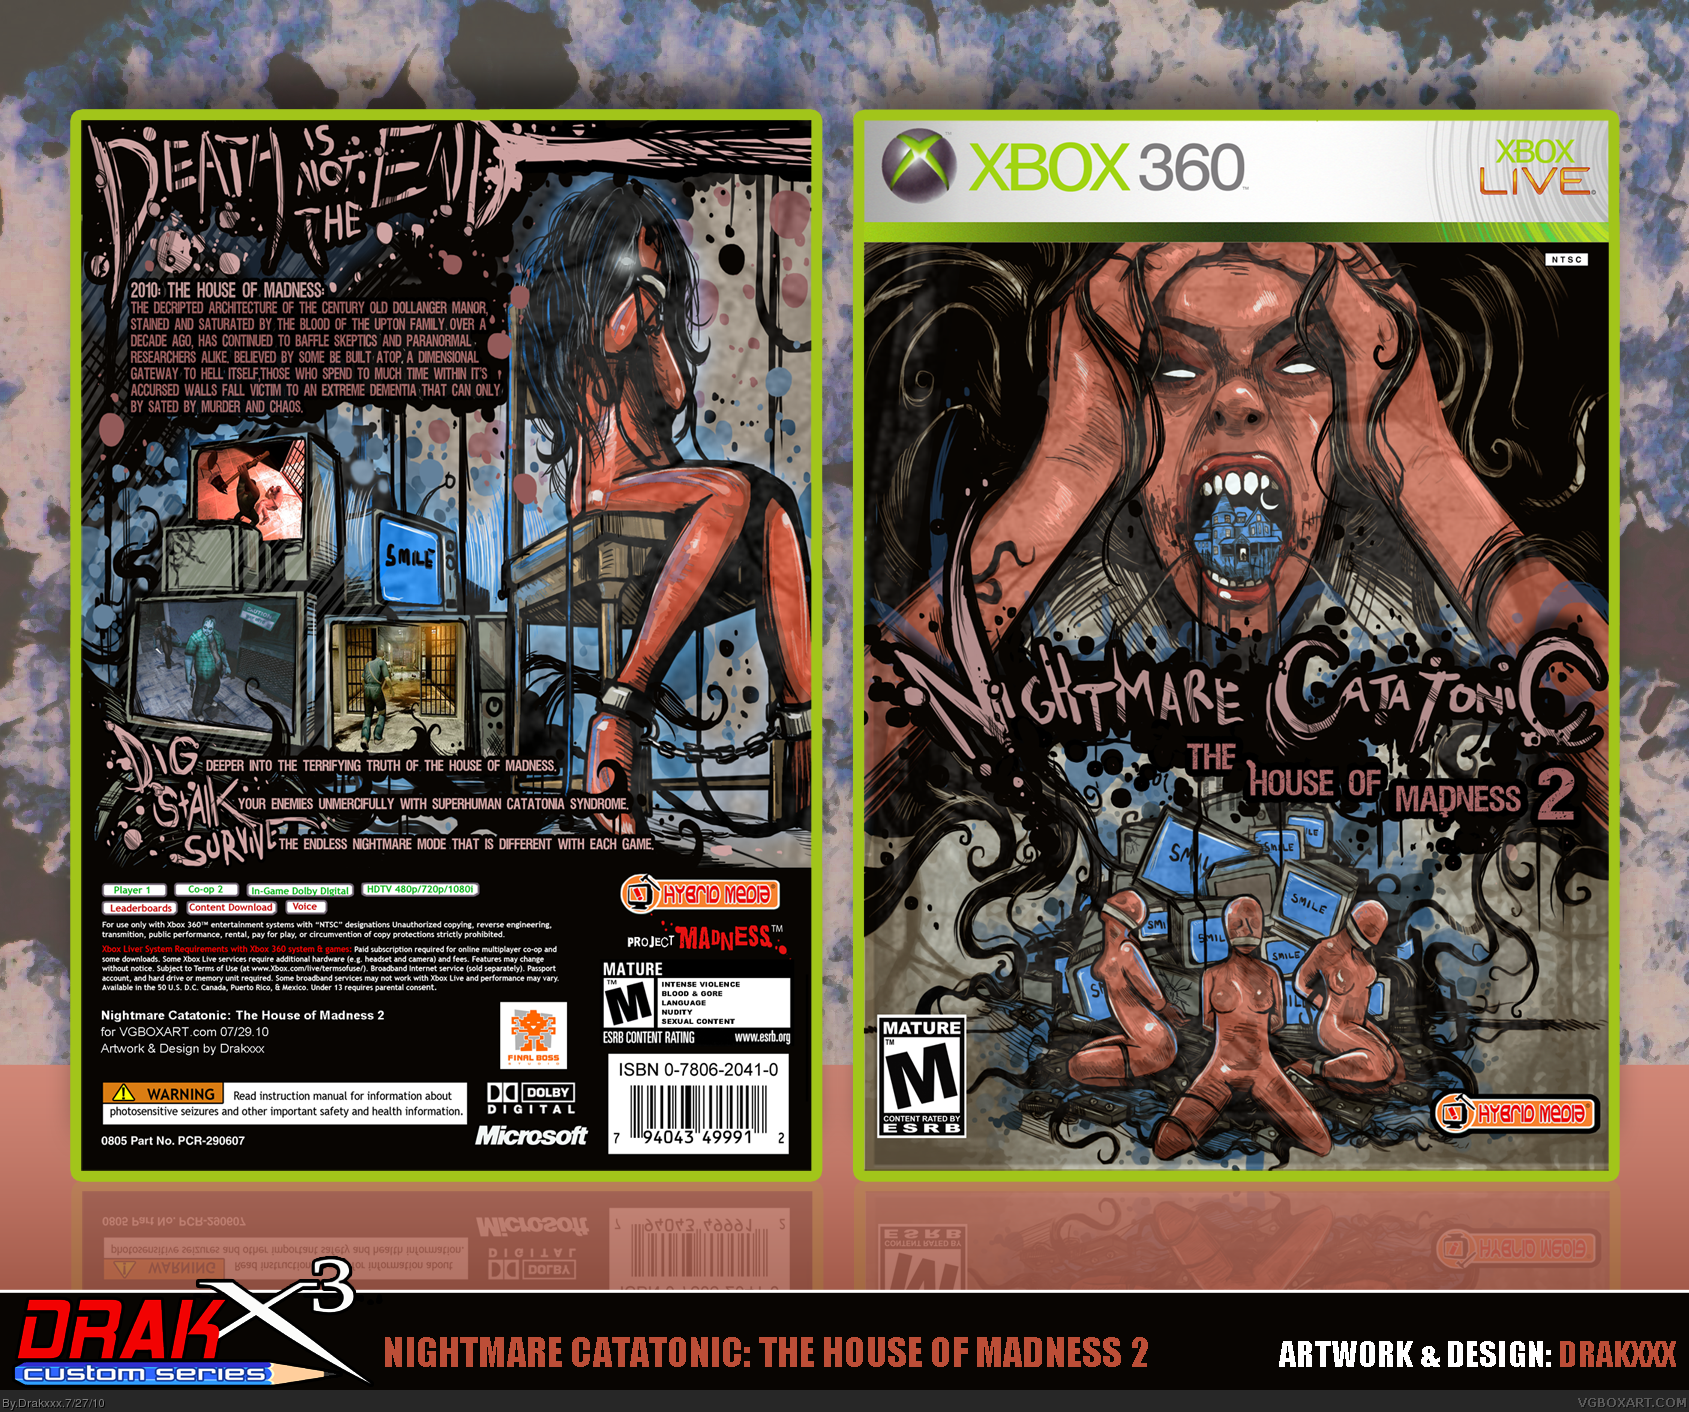 Nightmare Catatonic: The House of Madness 2 box cover